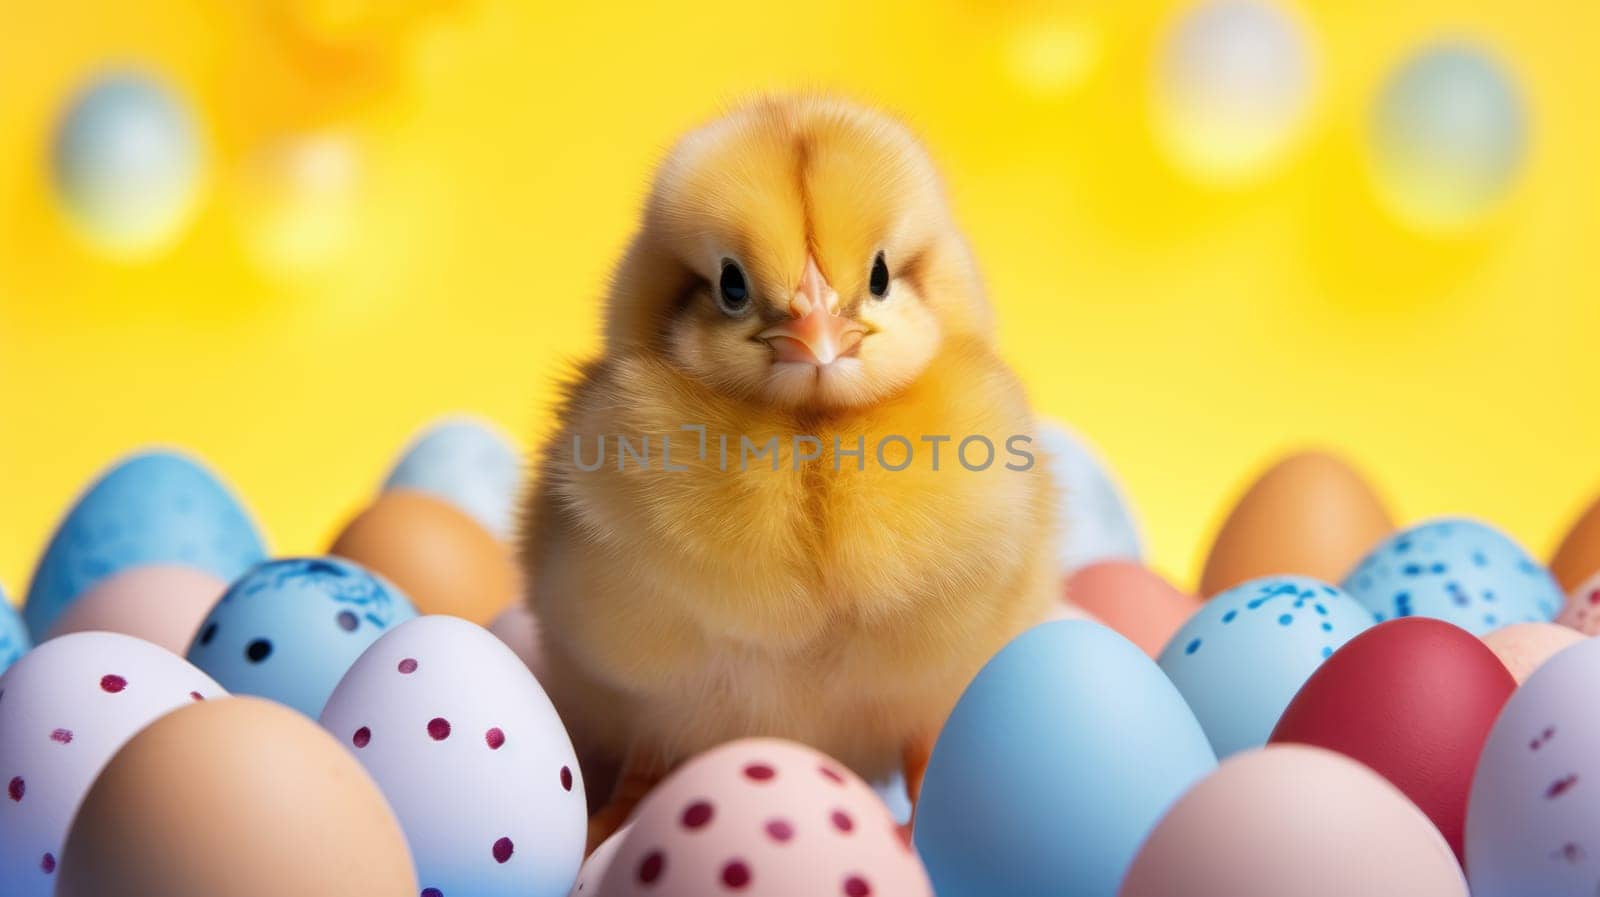 Fluffy yellow baby chick standing in front of colorful Easter eggs by JuliaDorian